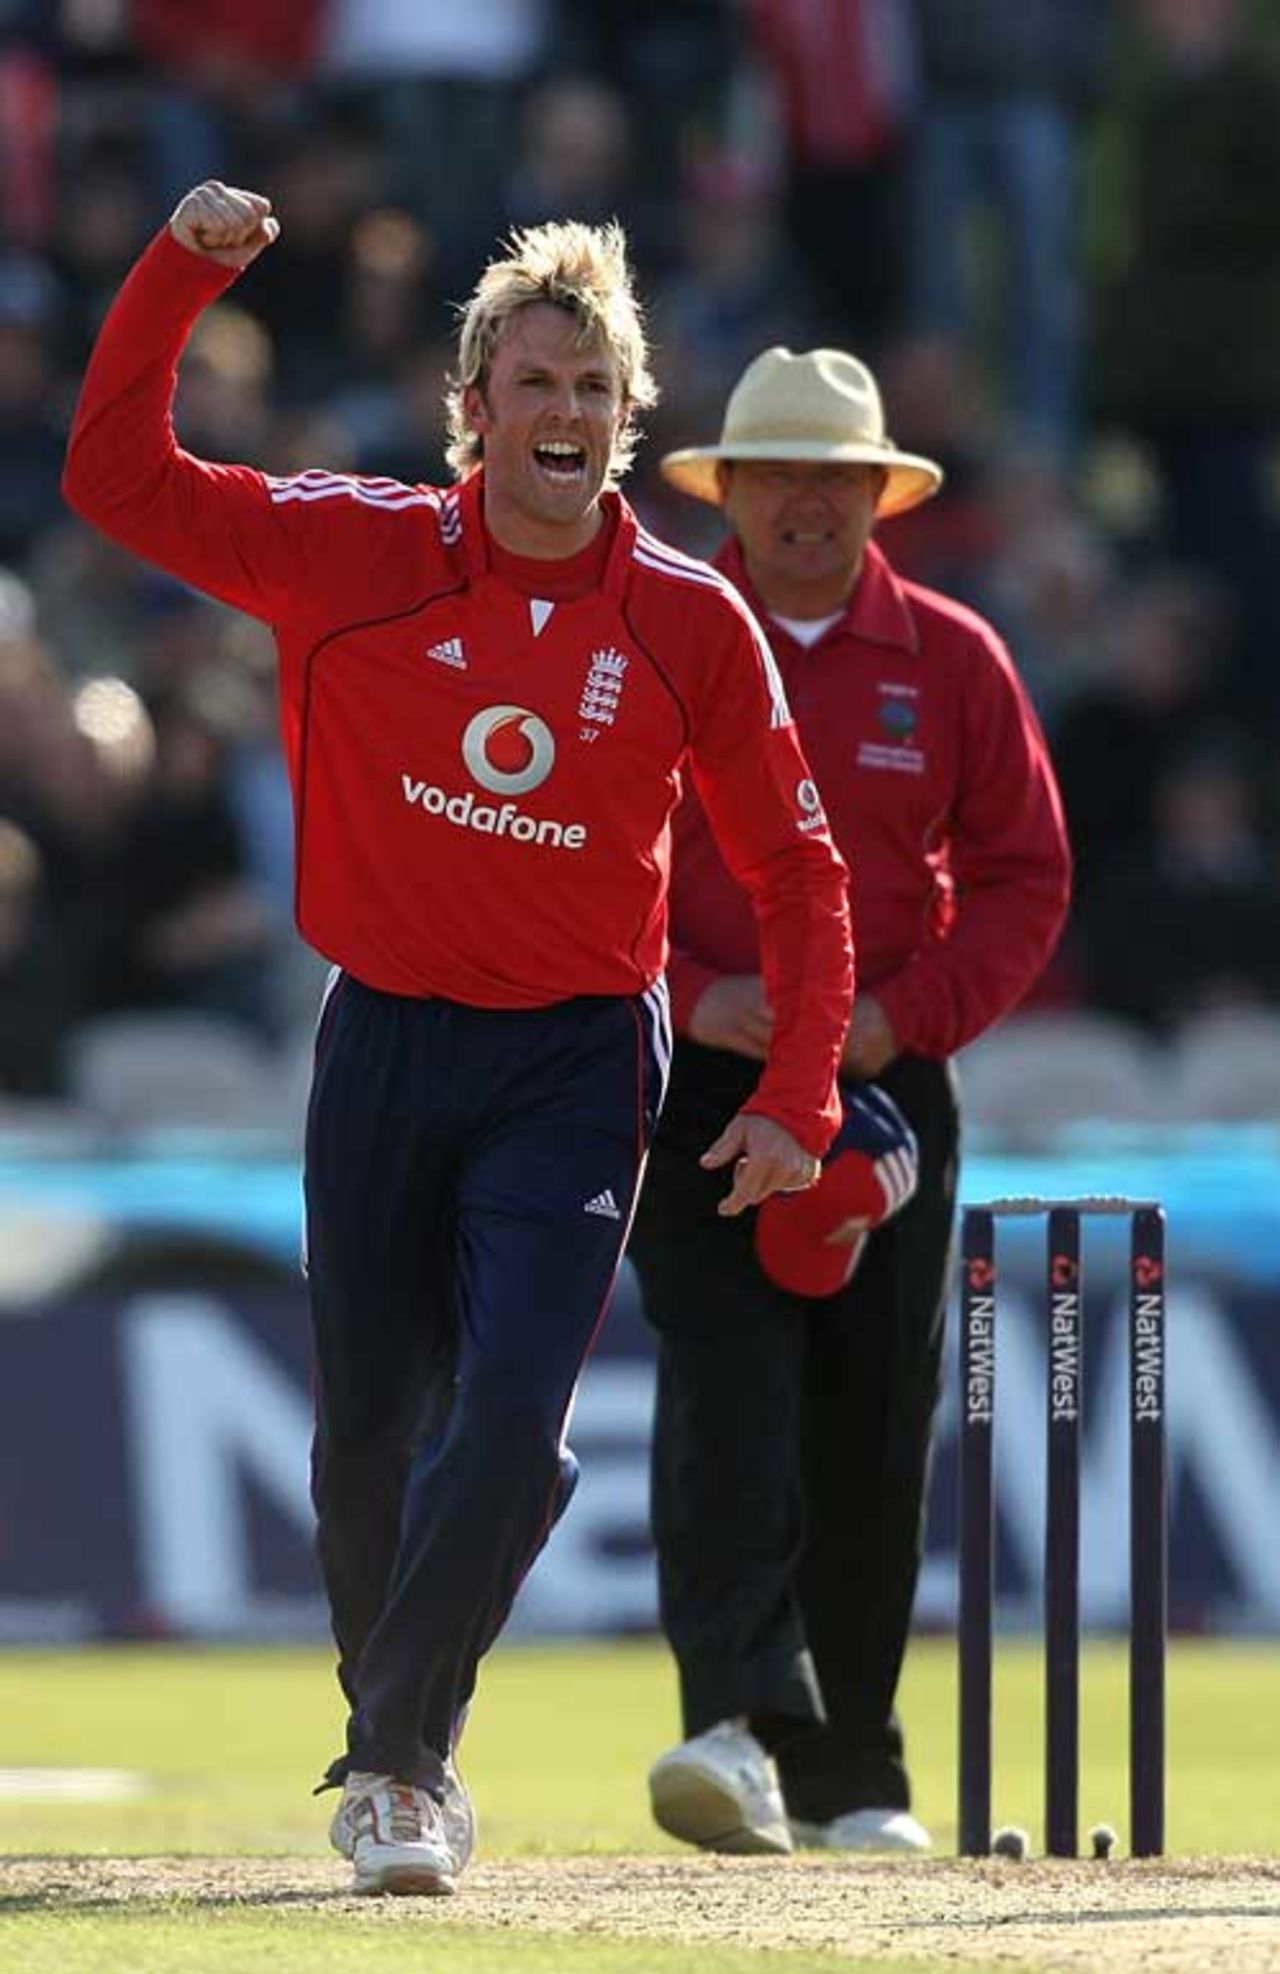 Graeme Swann picked up two wickets in a superb spell, England v New Zealand, Twenty20 international, Old Trafford, June 13, 2008